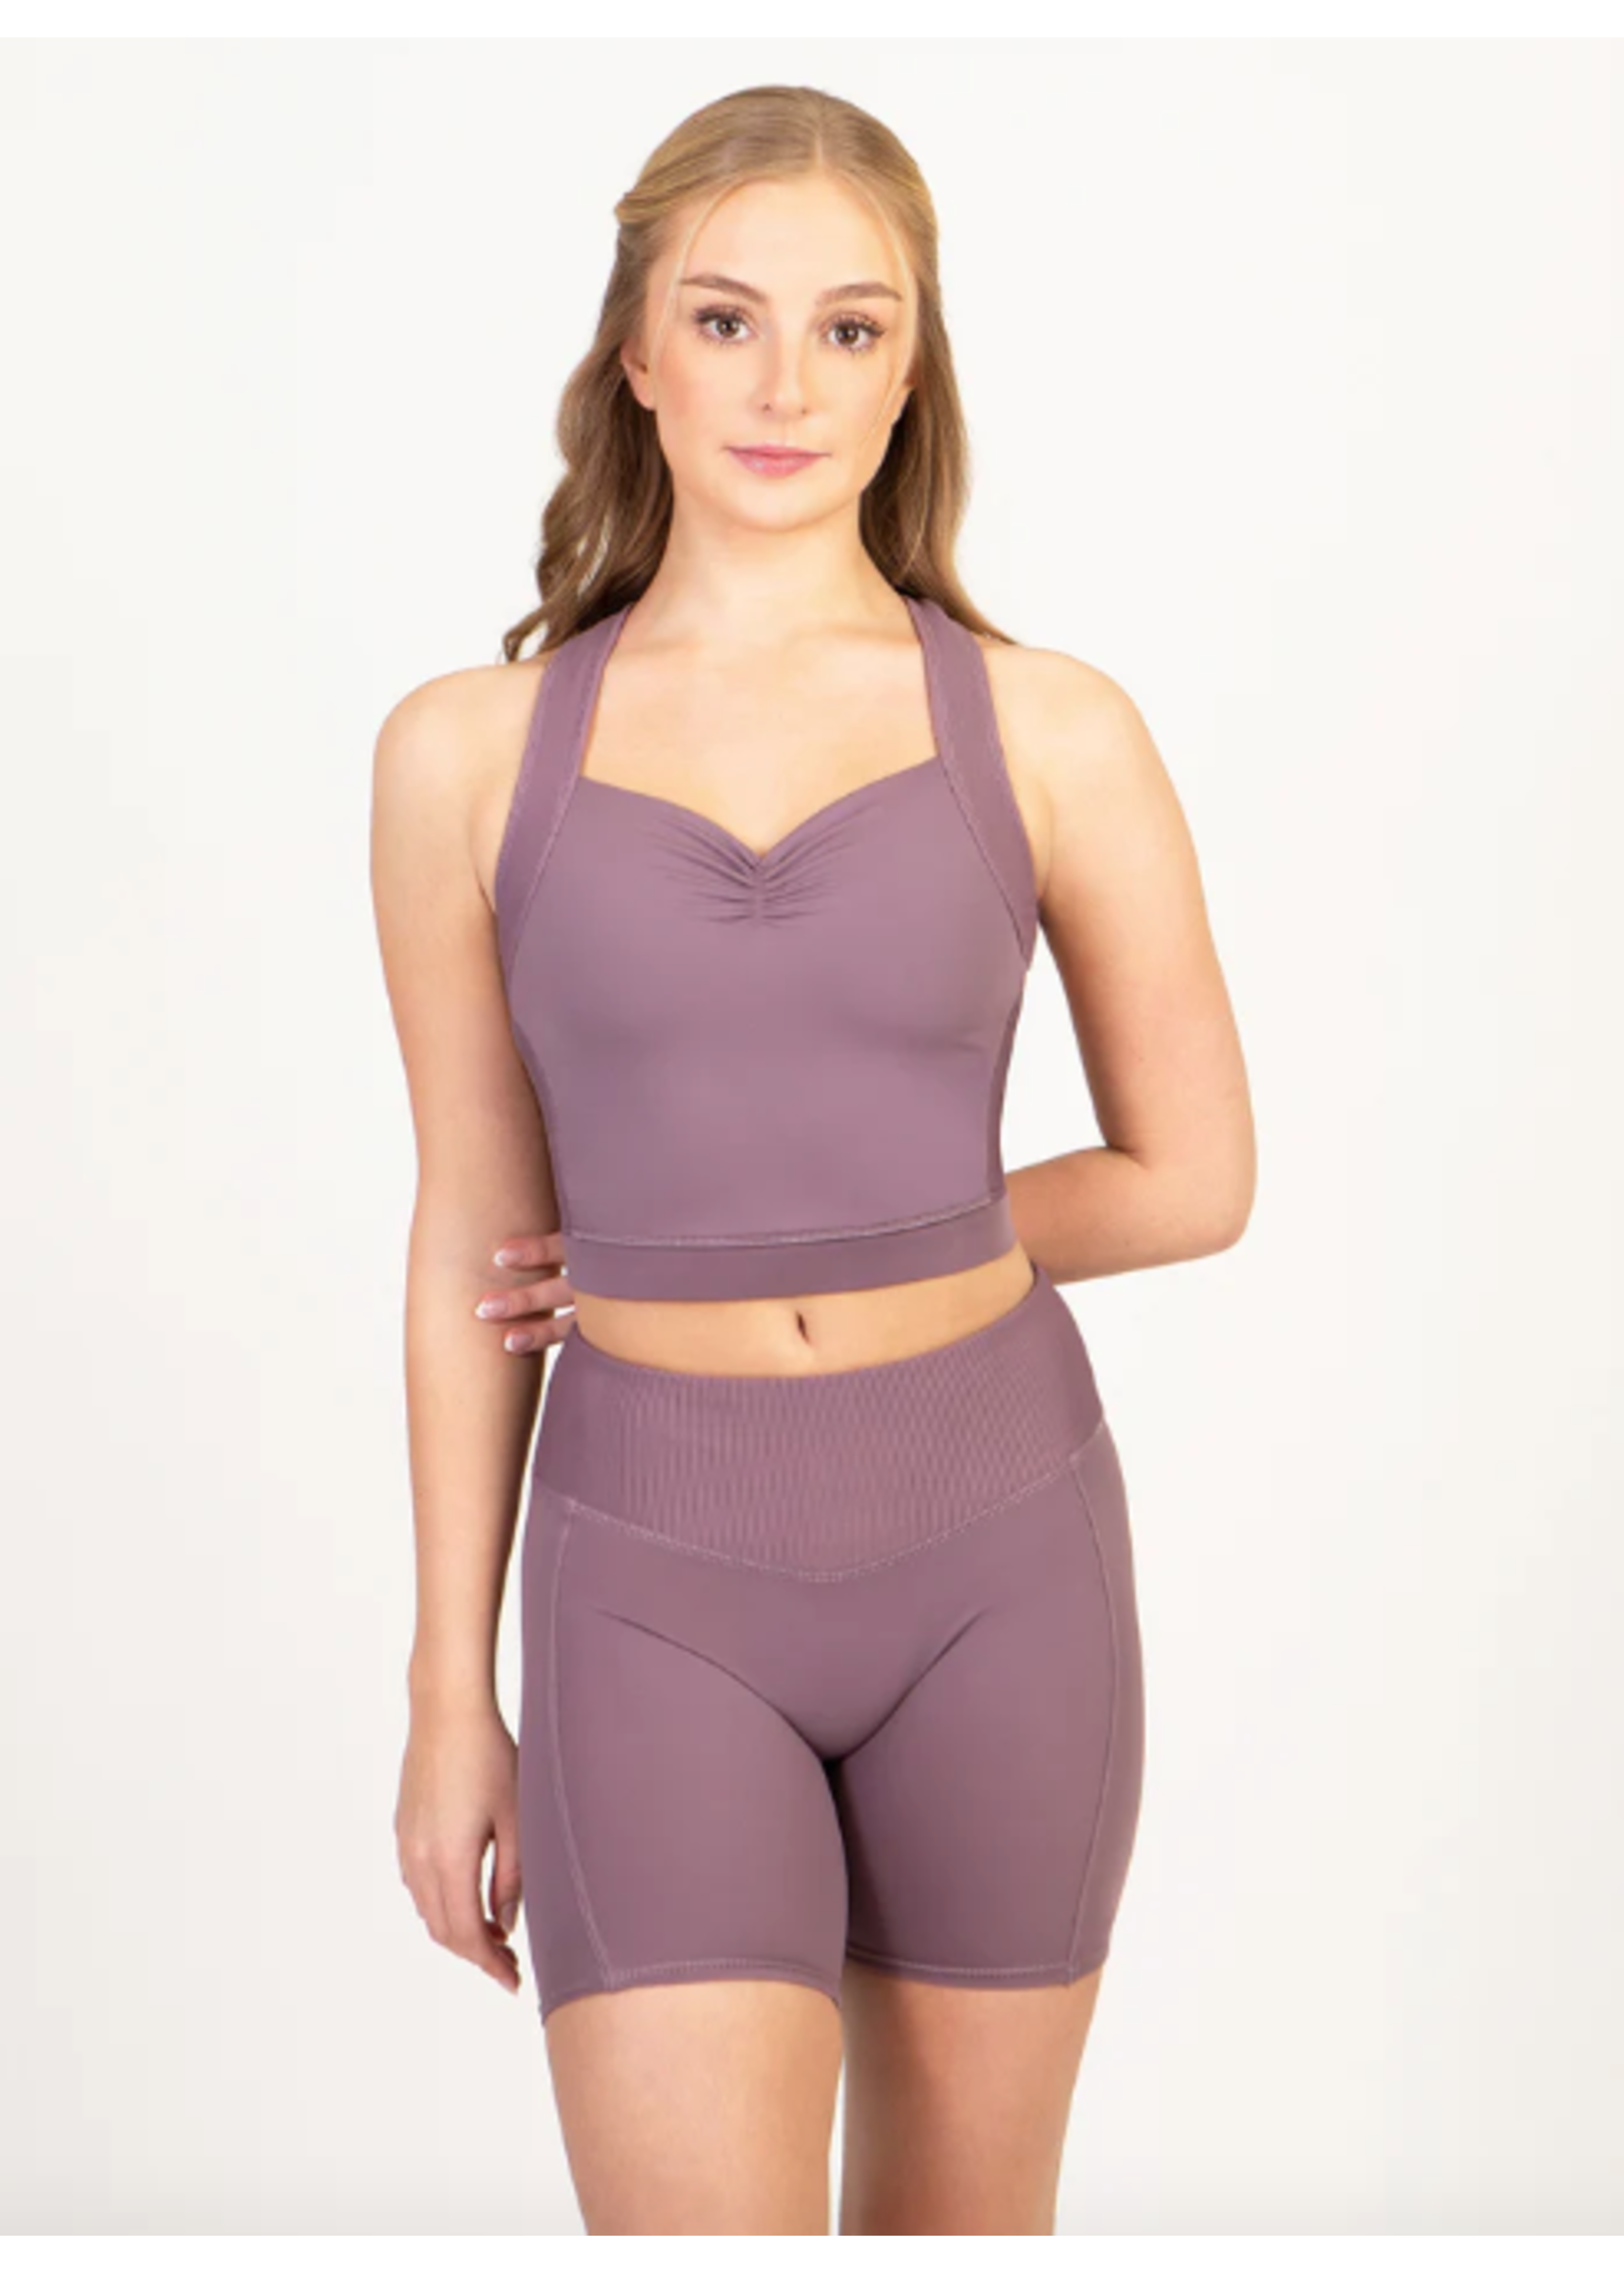 SUFFOLK 4014A BALLET CORE RIBBED TRIMMED TANK CROP TOP